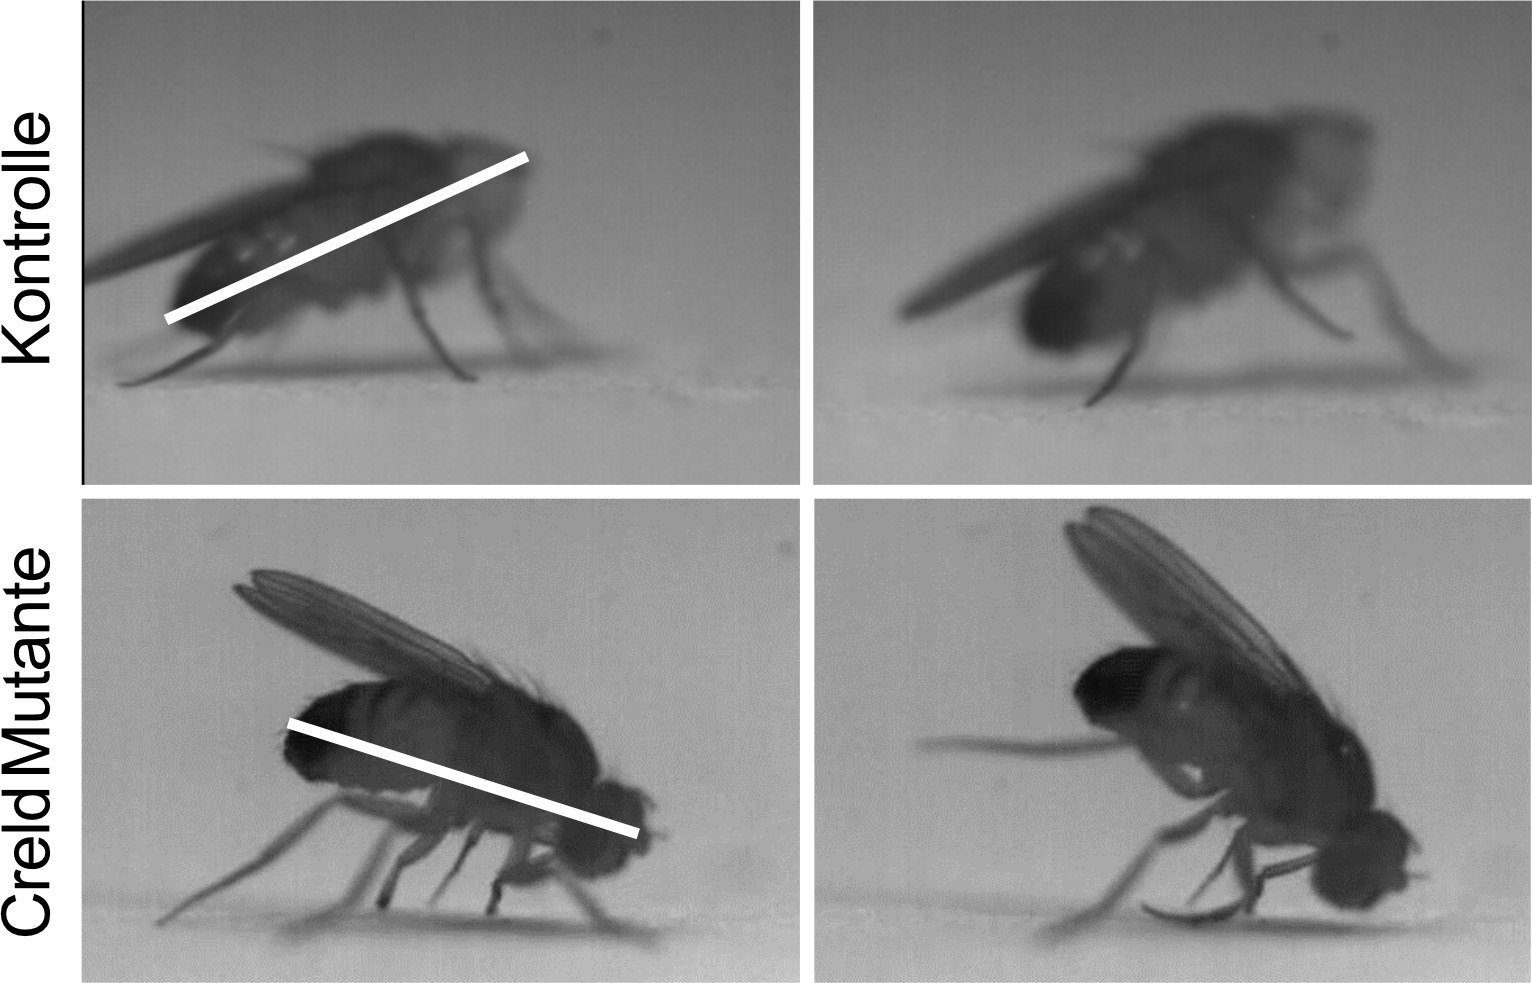 Flies without Creld suffer from severe motor disorders.